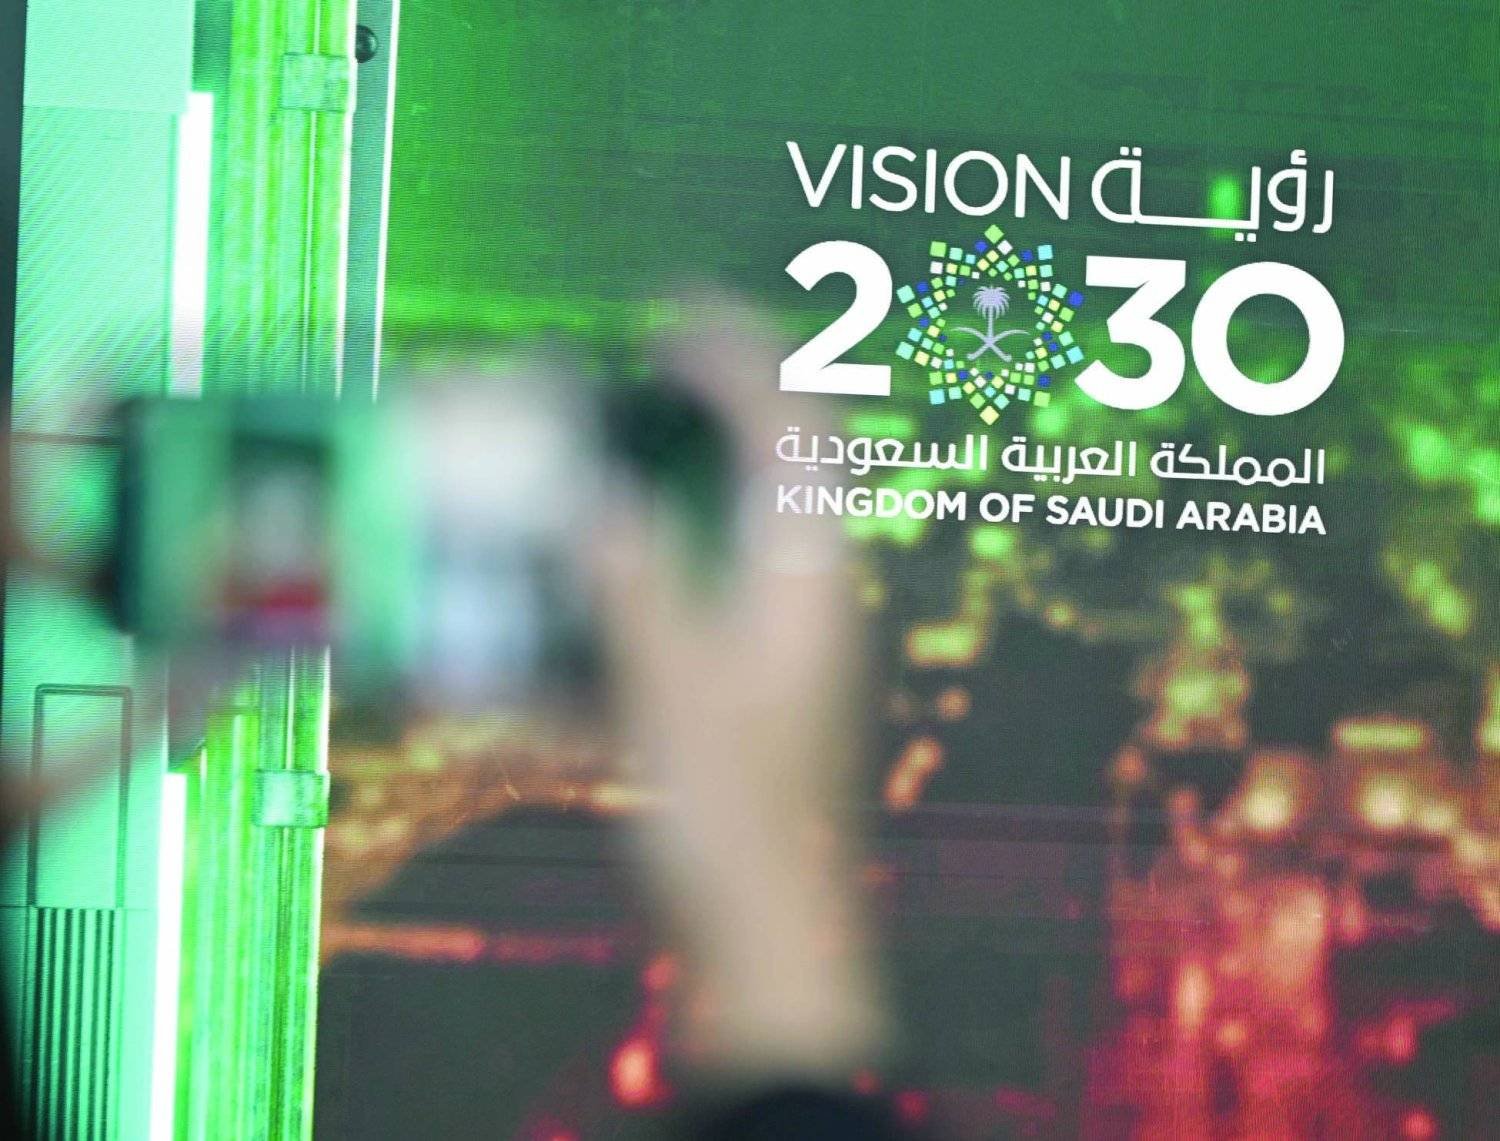 Vision 2030 was launched on April 25, 2016. (Asharq Al-Awsat)